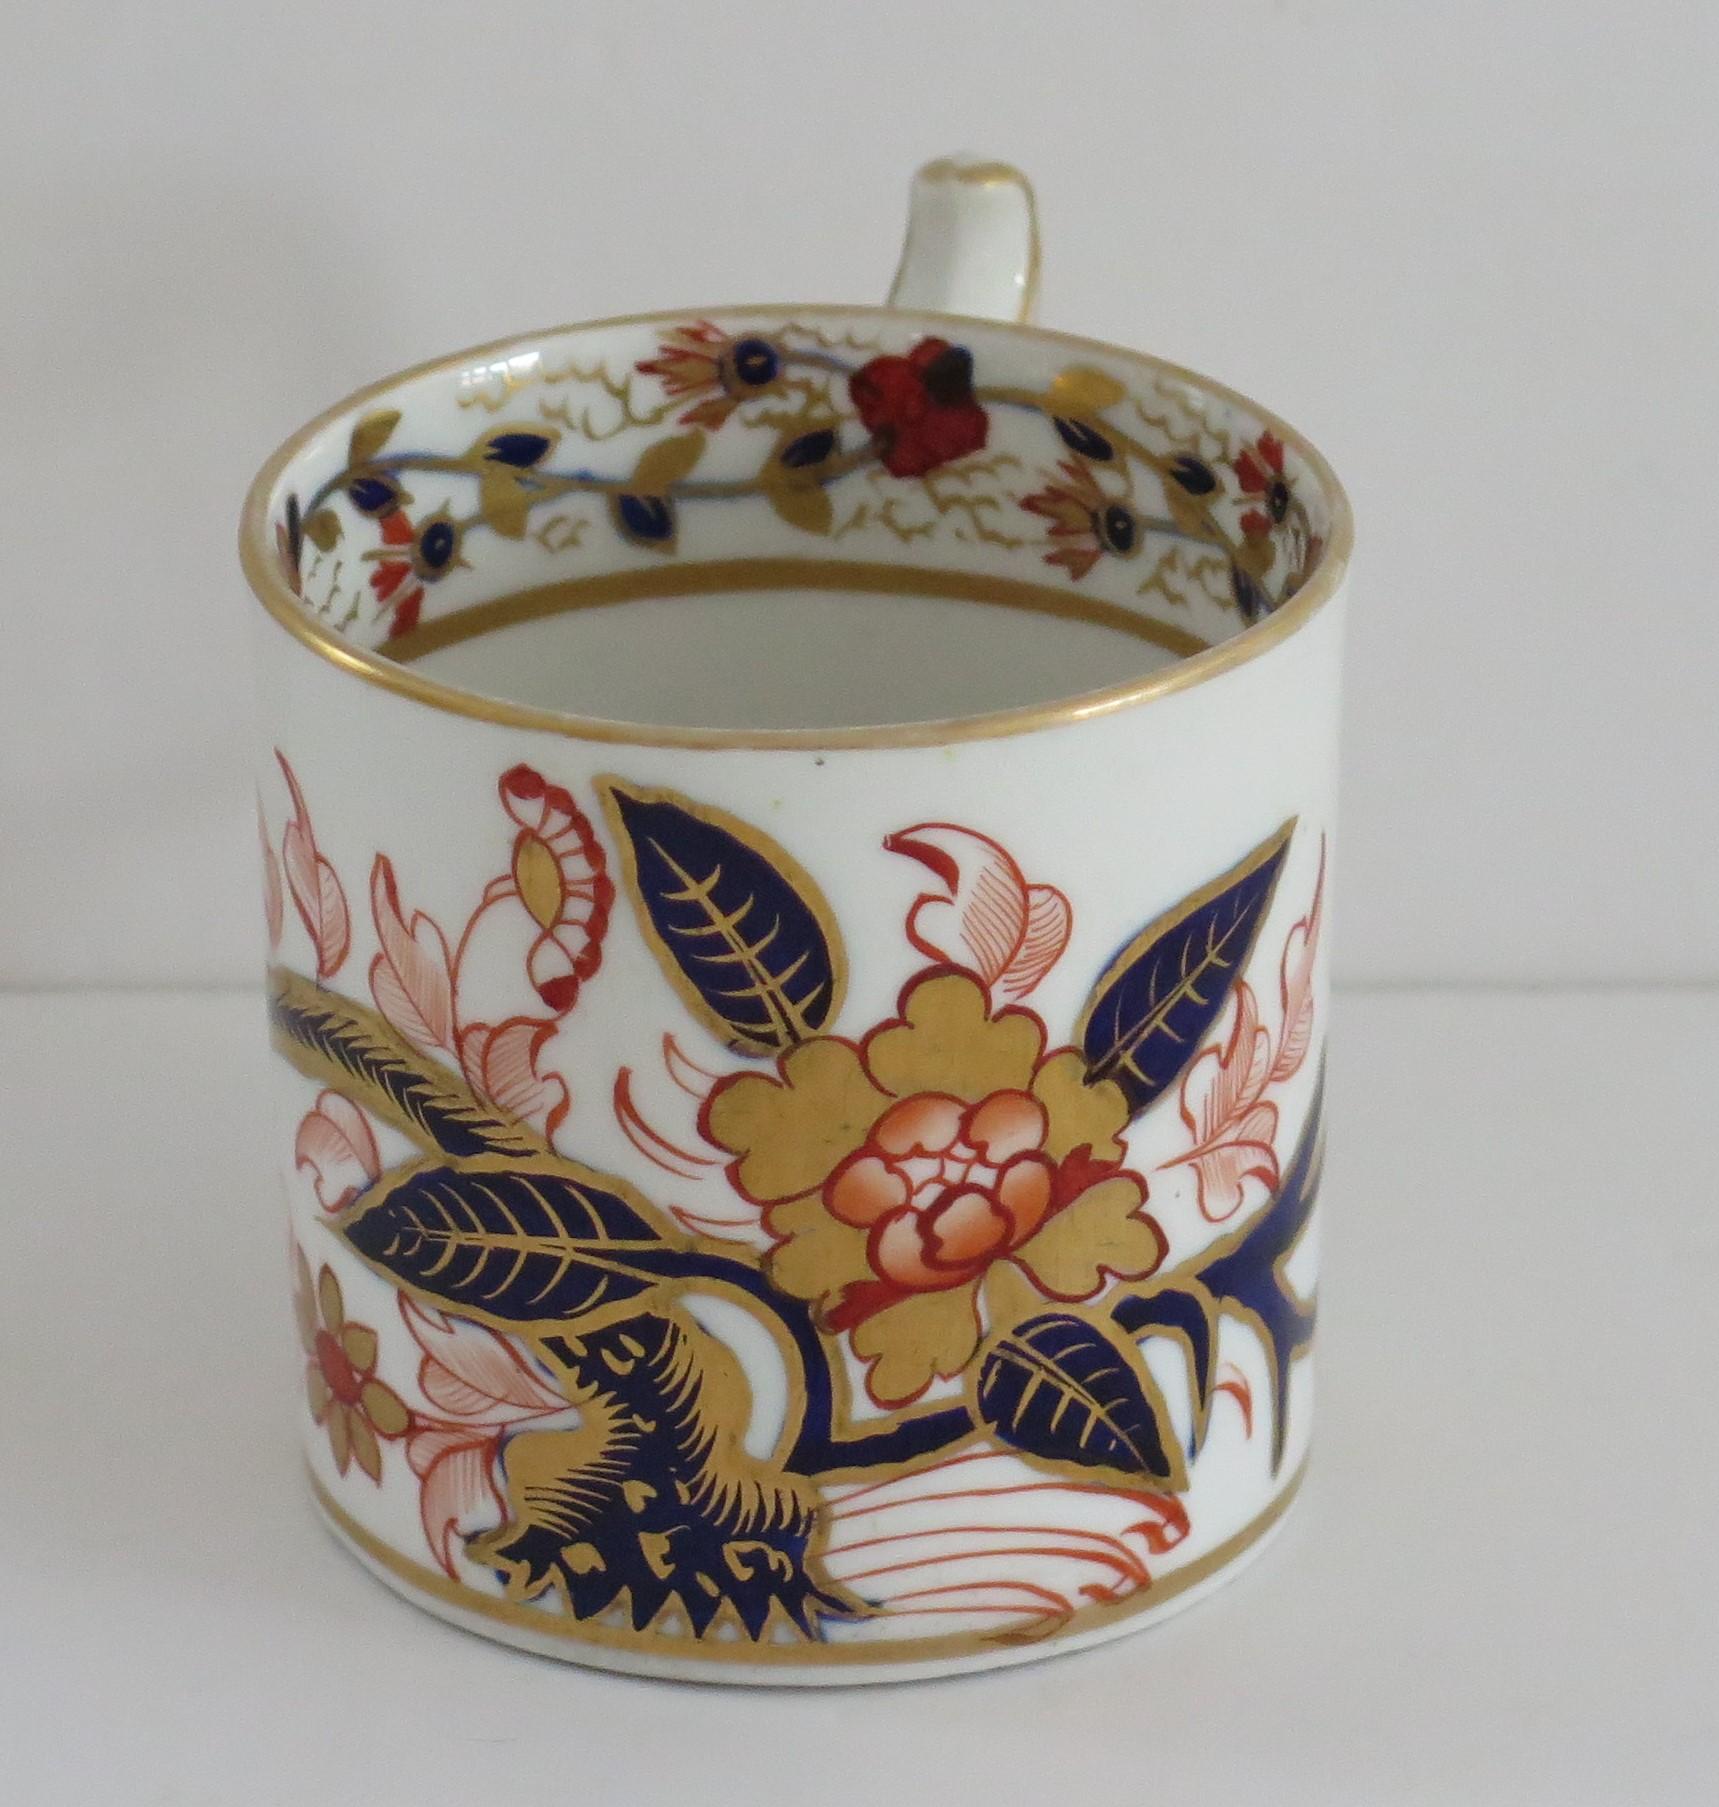 This is an exquisite coffee can made by the DERBY factory, in the reign of George 111 in the early 19th century, circa 1810
.
Straight sided coffee cans were only made for about the first 20 years of the 19th century and are very collectable.